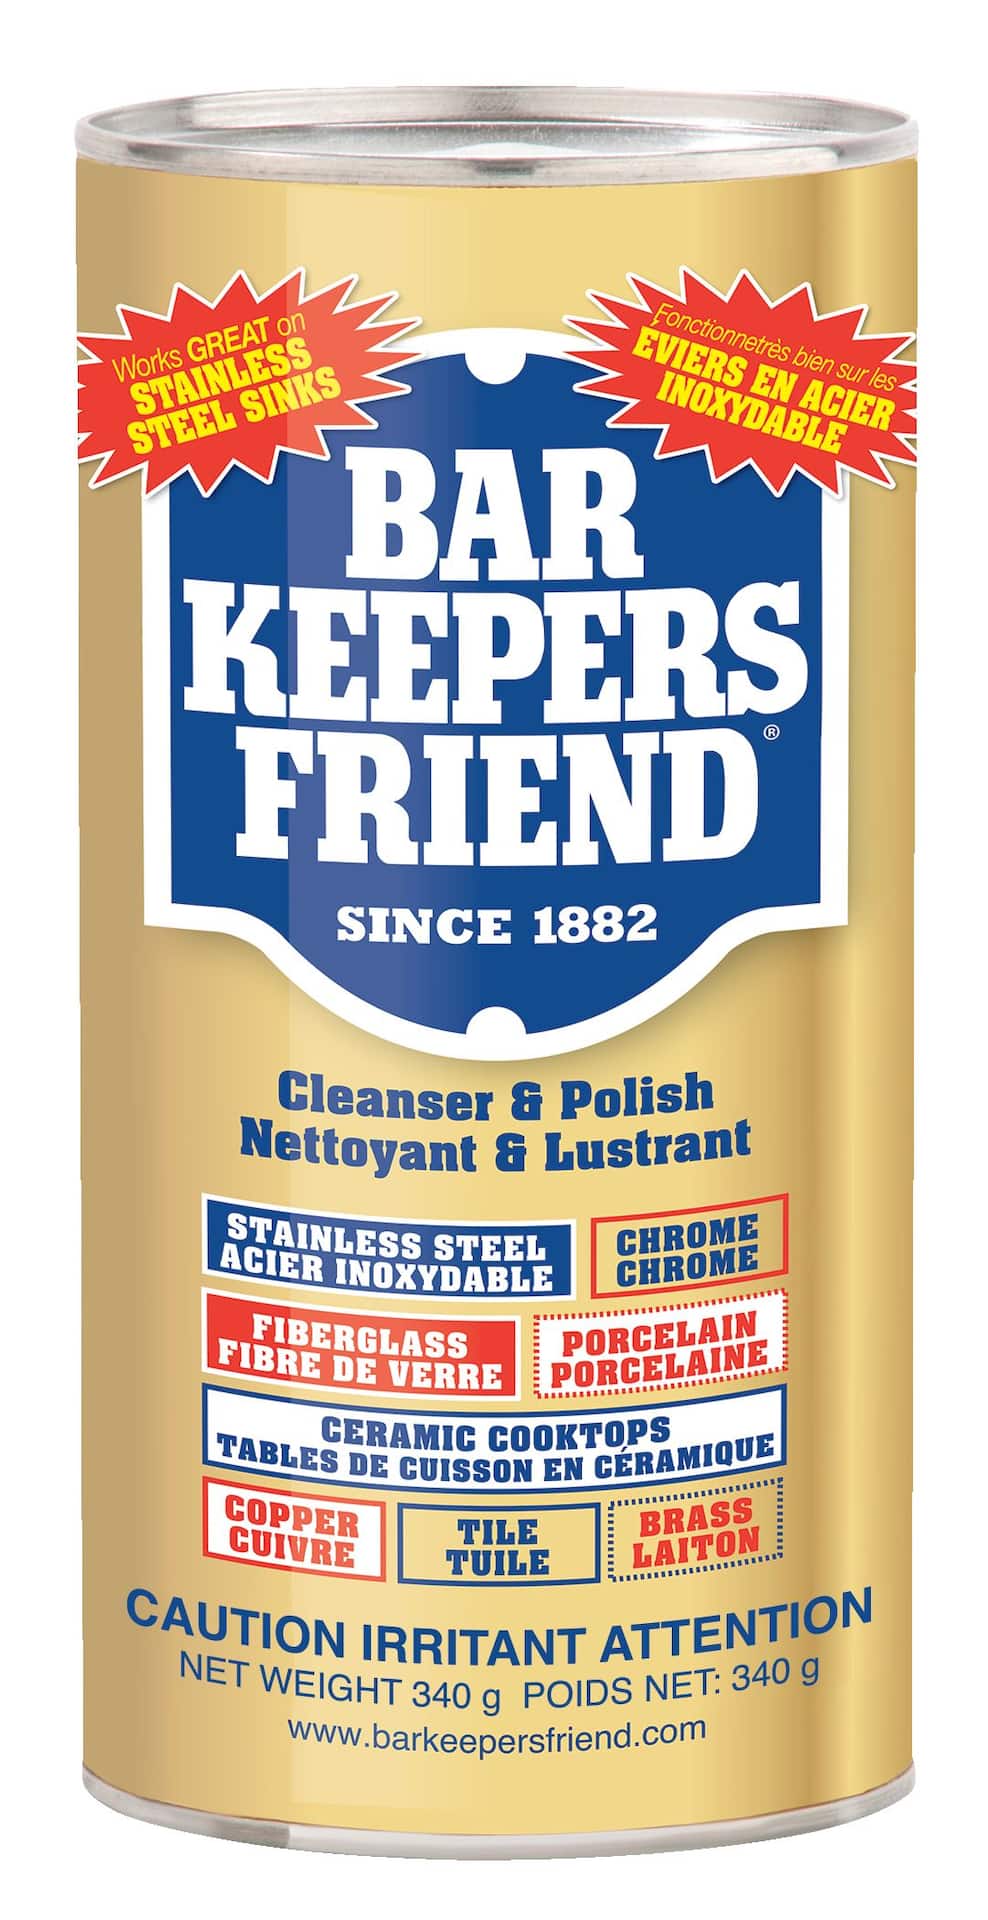 Bar Keepers Friend Powder Cleanser (12 oz - 4-pack) - Multipurpose Cleaner  & Stain Remover - Bathroom, Kitchen & Outdoor Use - For Stainless Steel